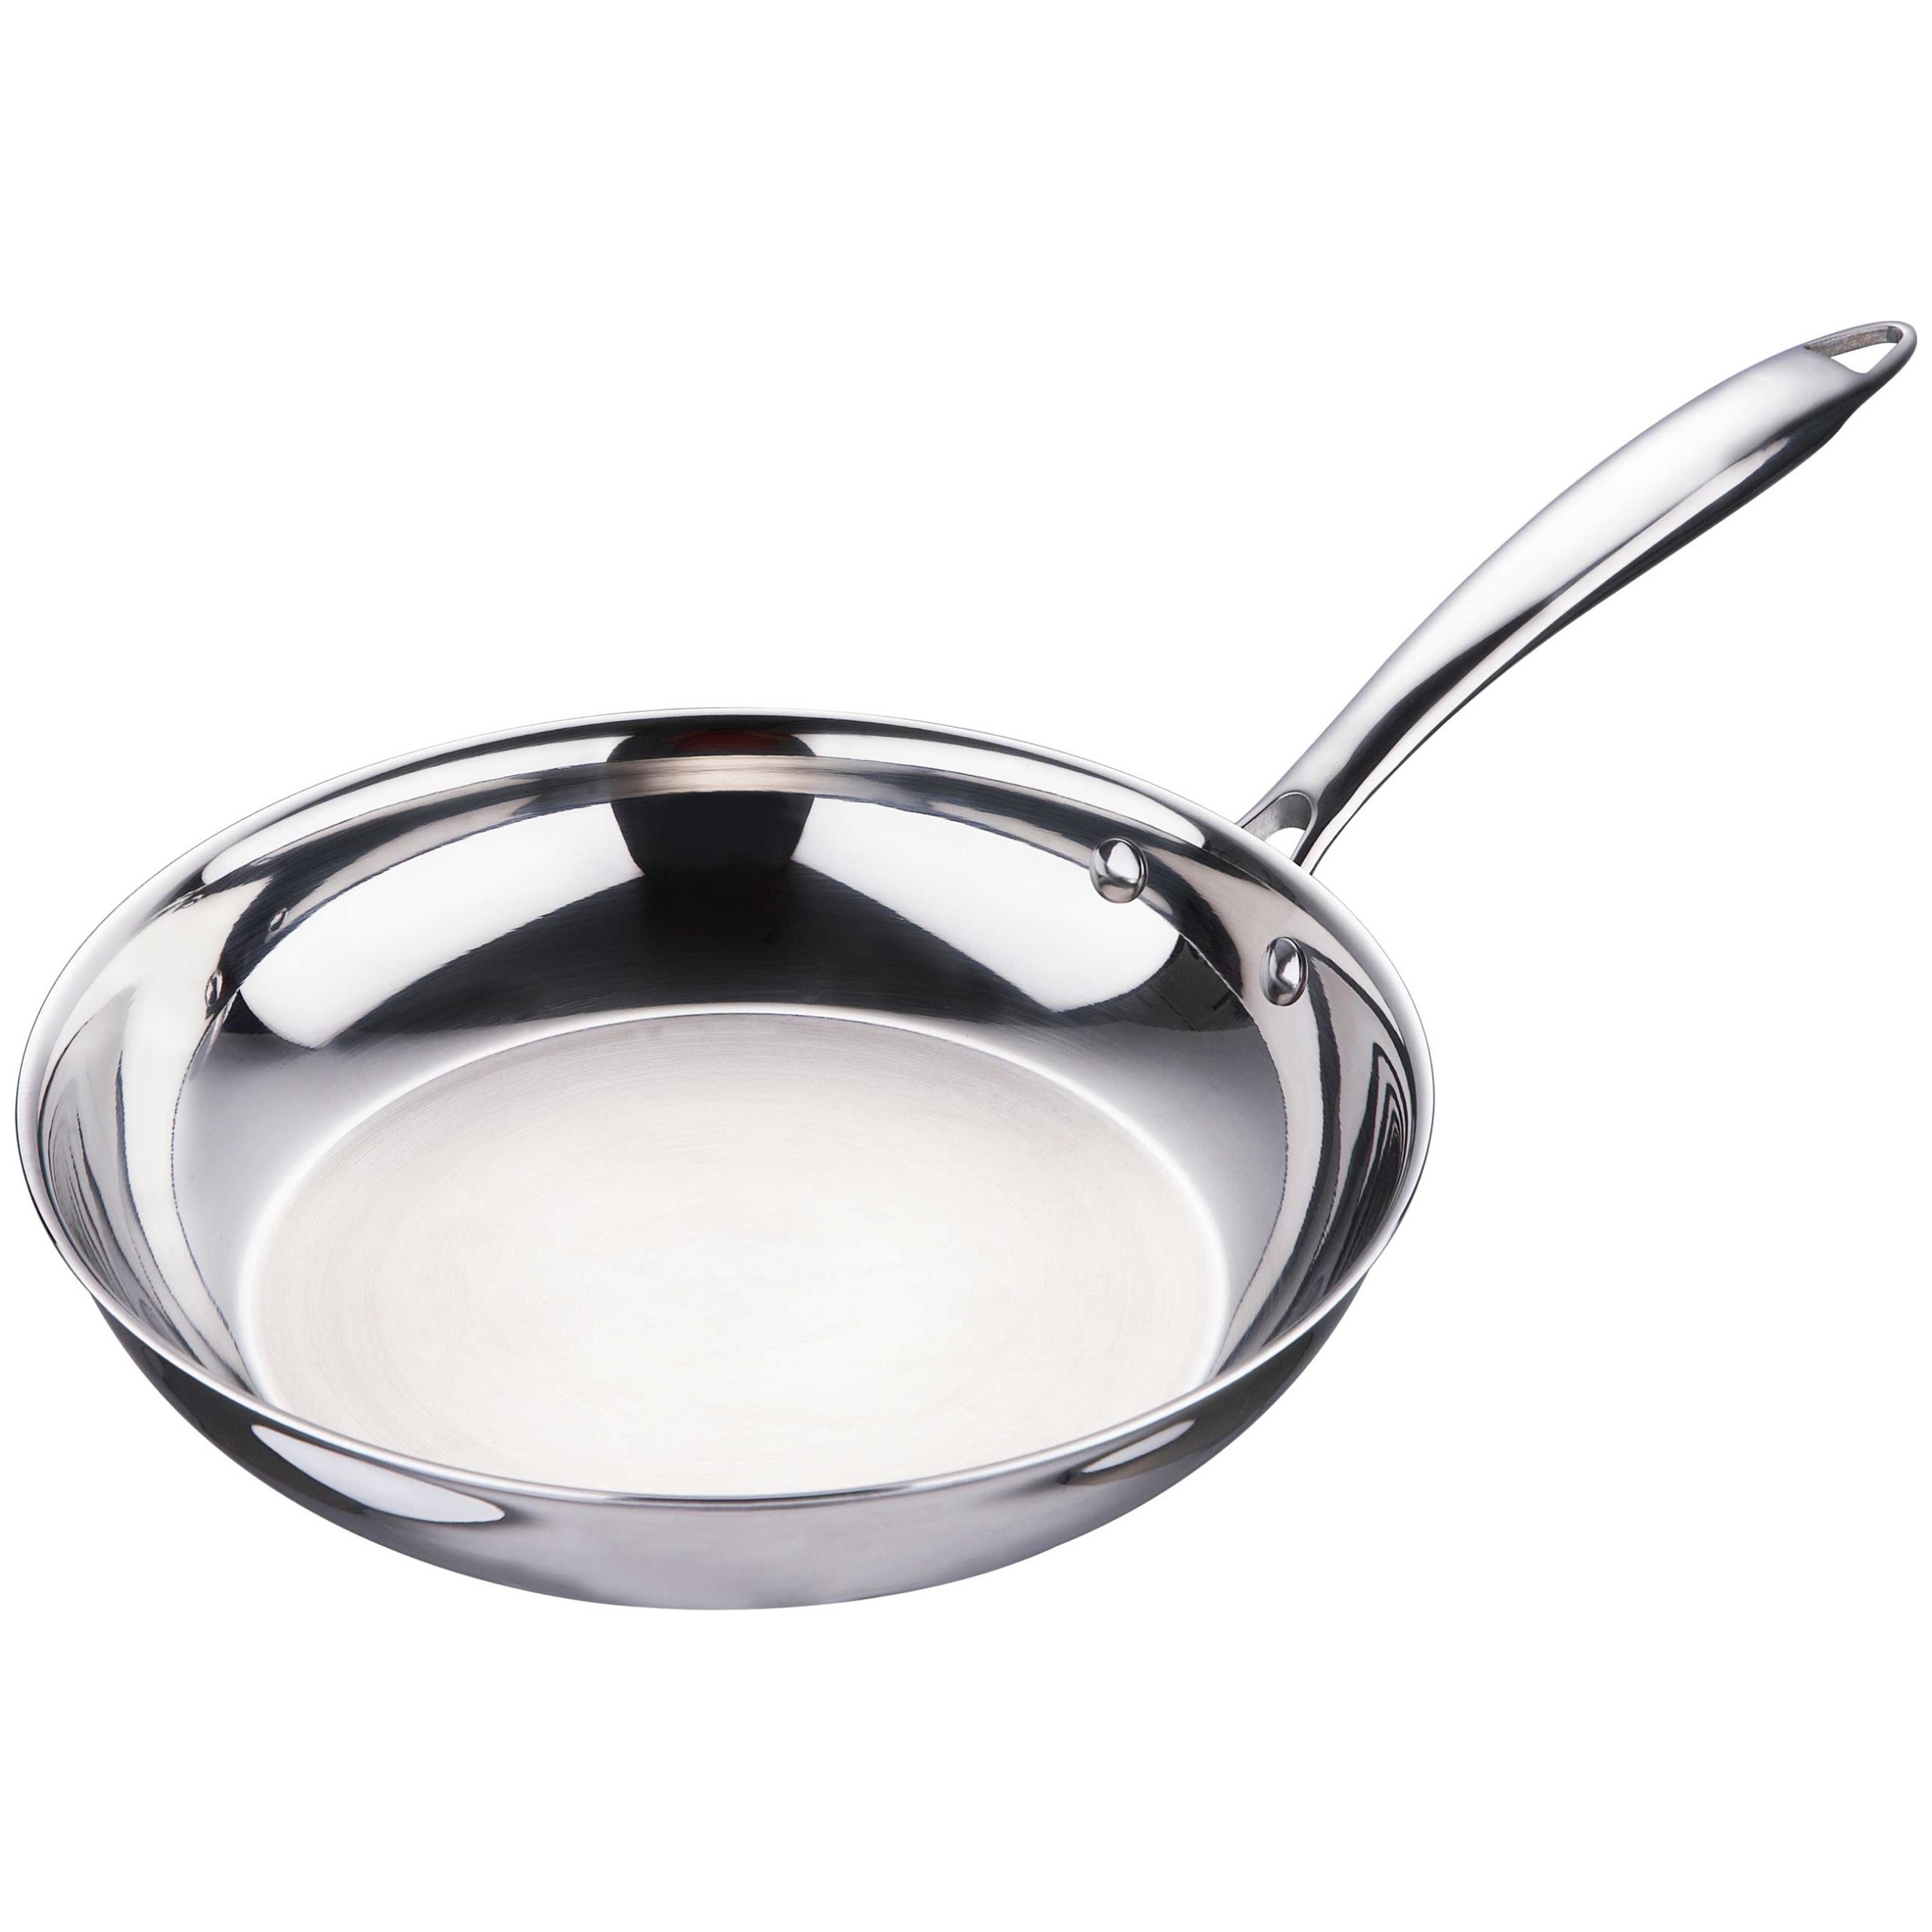 Bergner Argent Tri-Ply Silver Stainless Steel Tadka Pan in 12 cm size